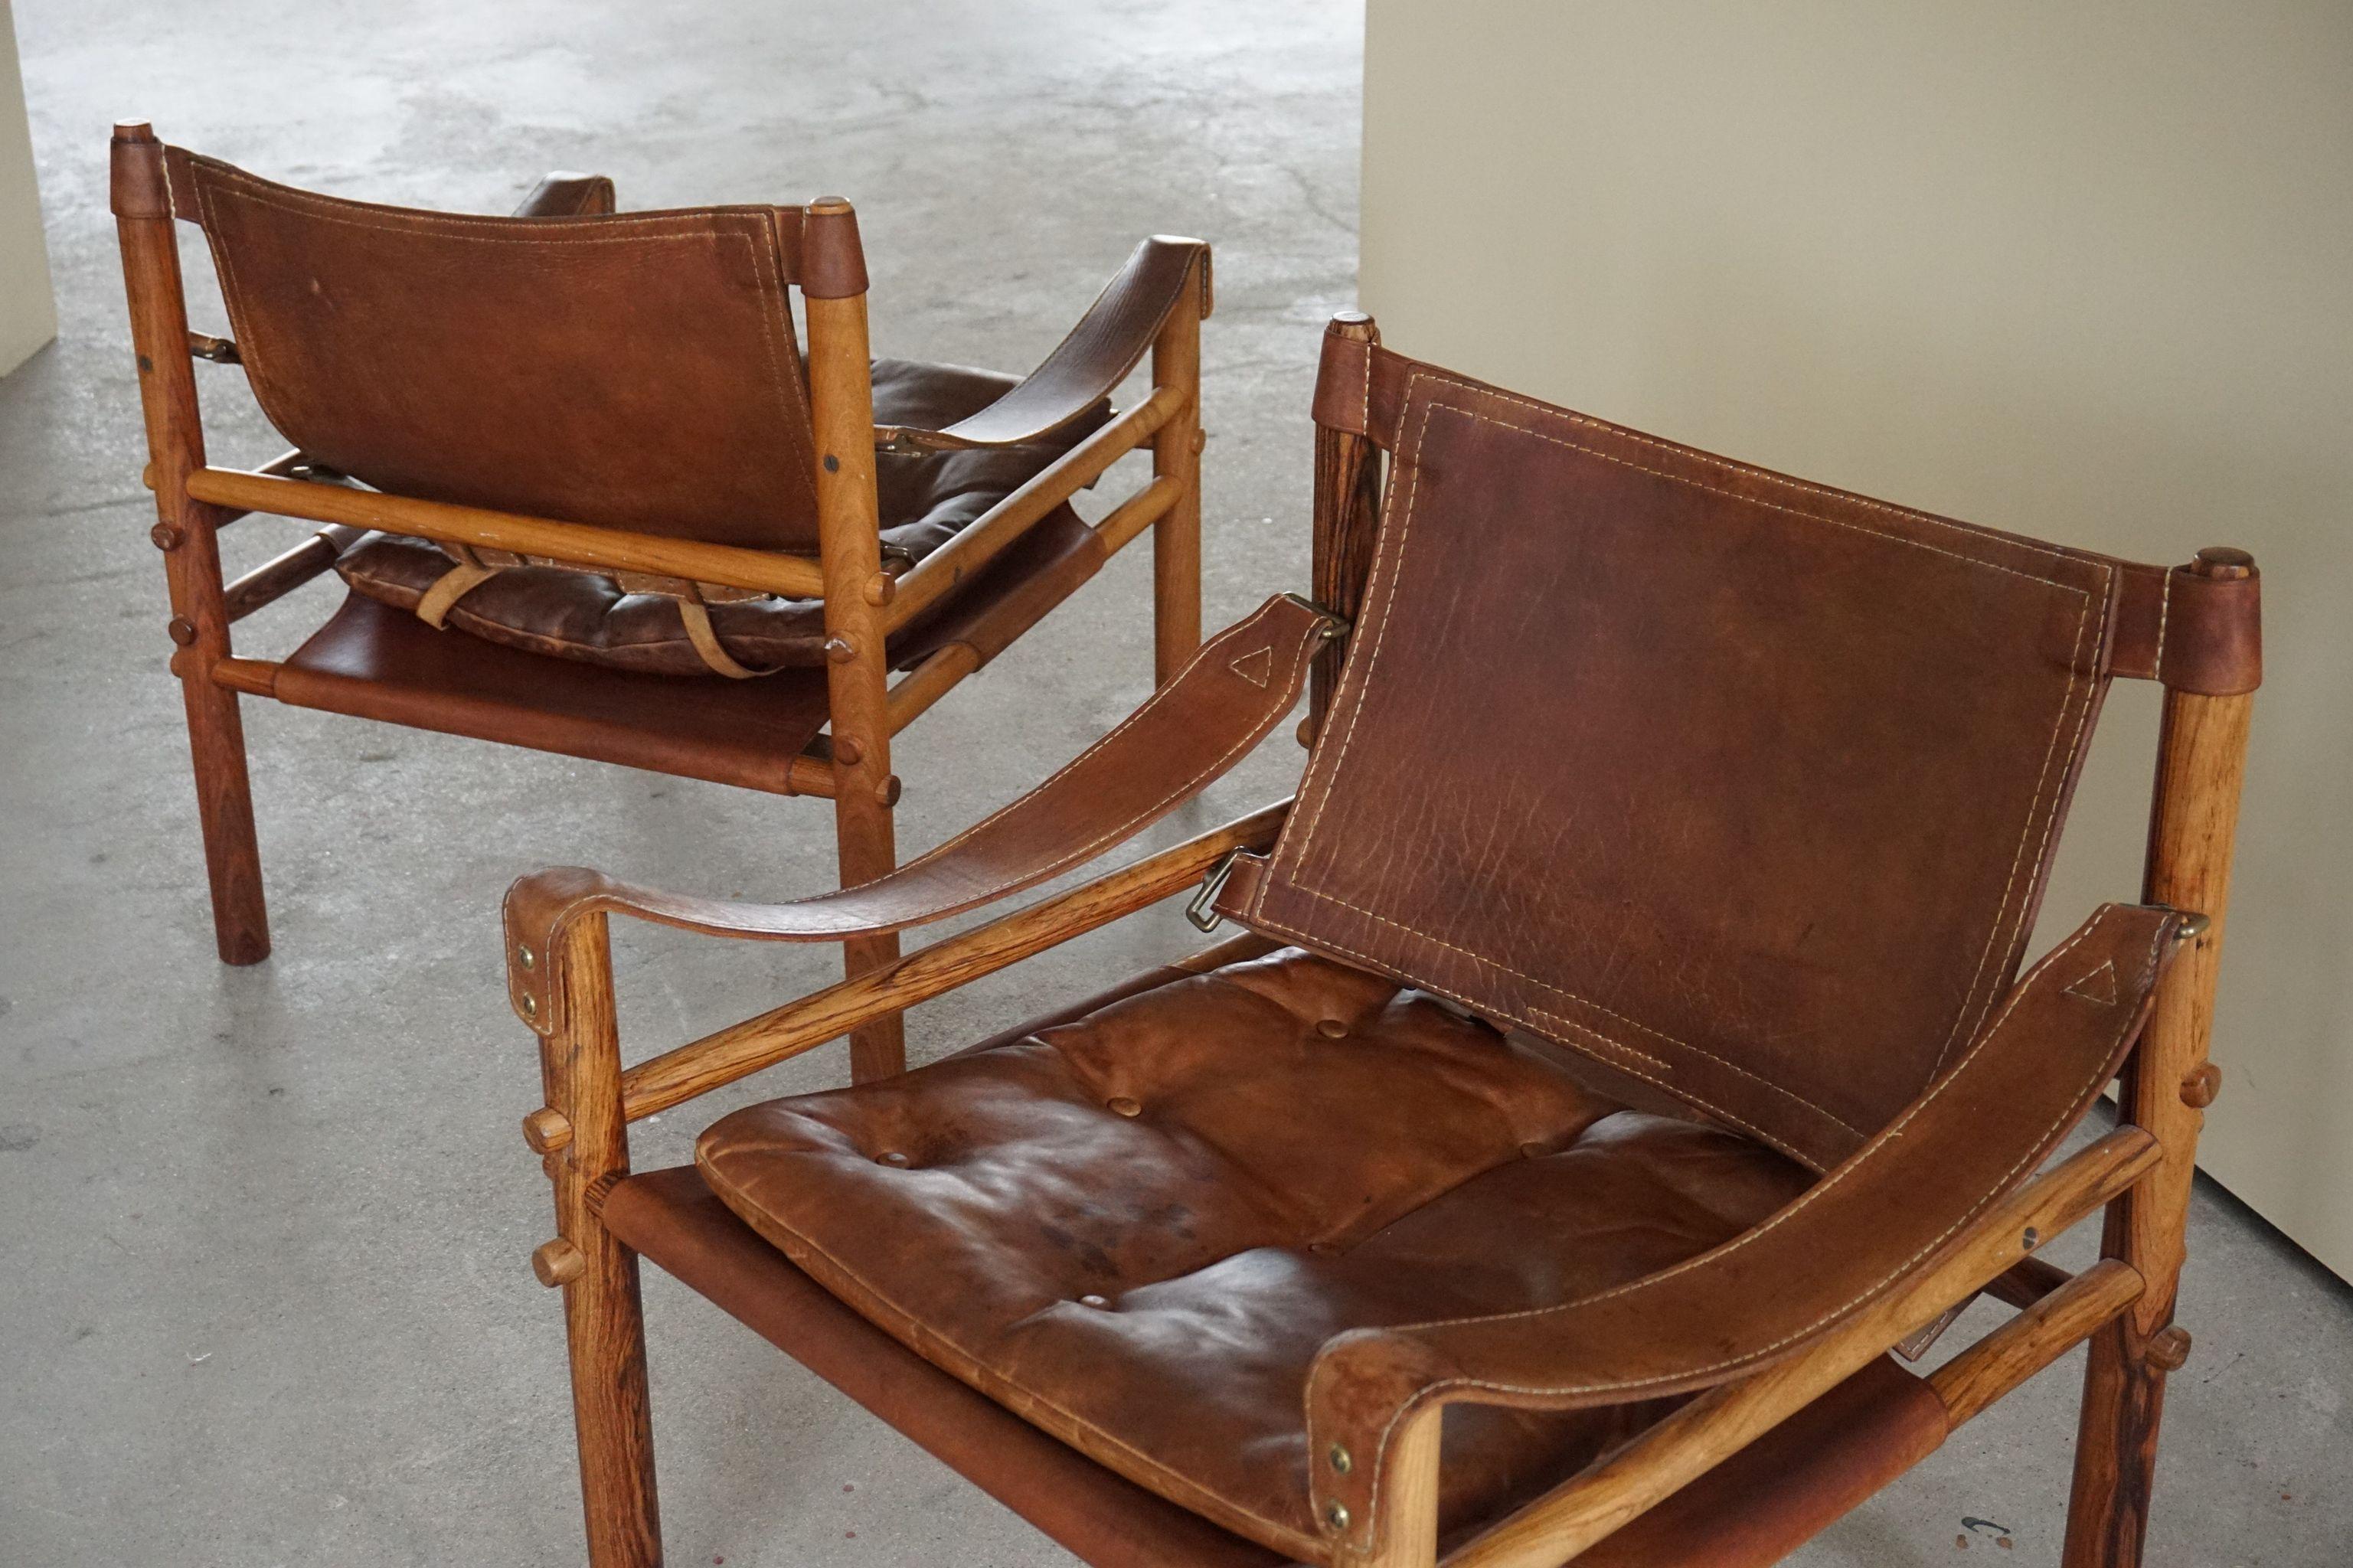 Pair of Sirocco Safari Chairs, Made by Arne Norell AB in Aneby Sweden, 1960s 5